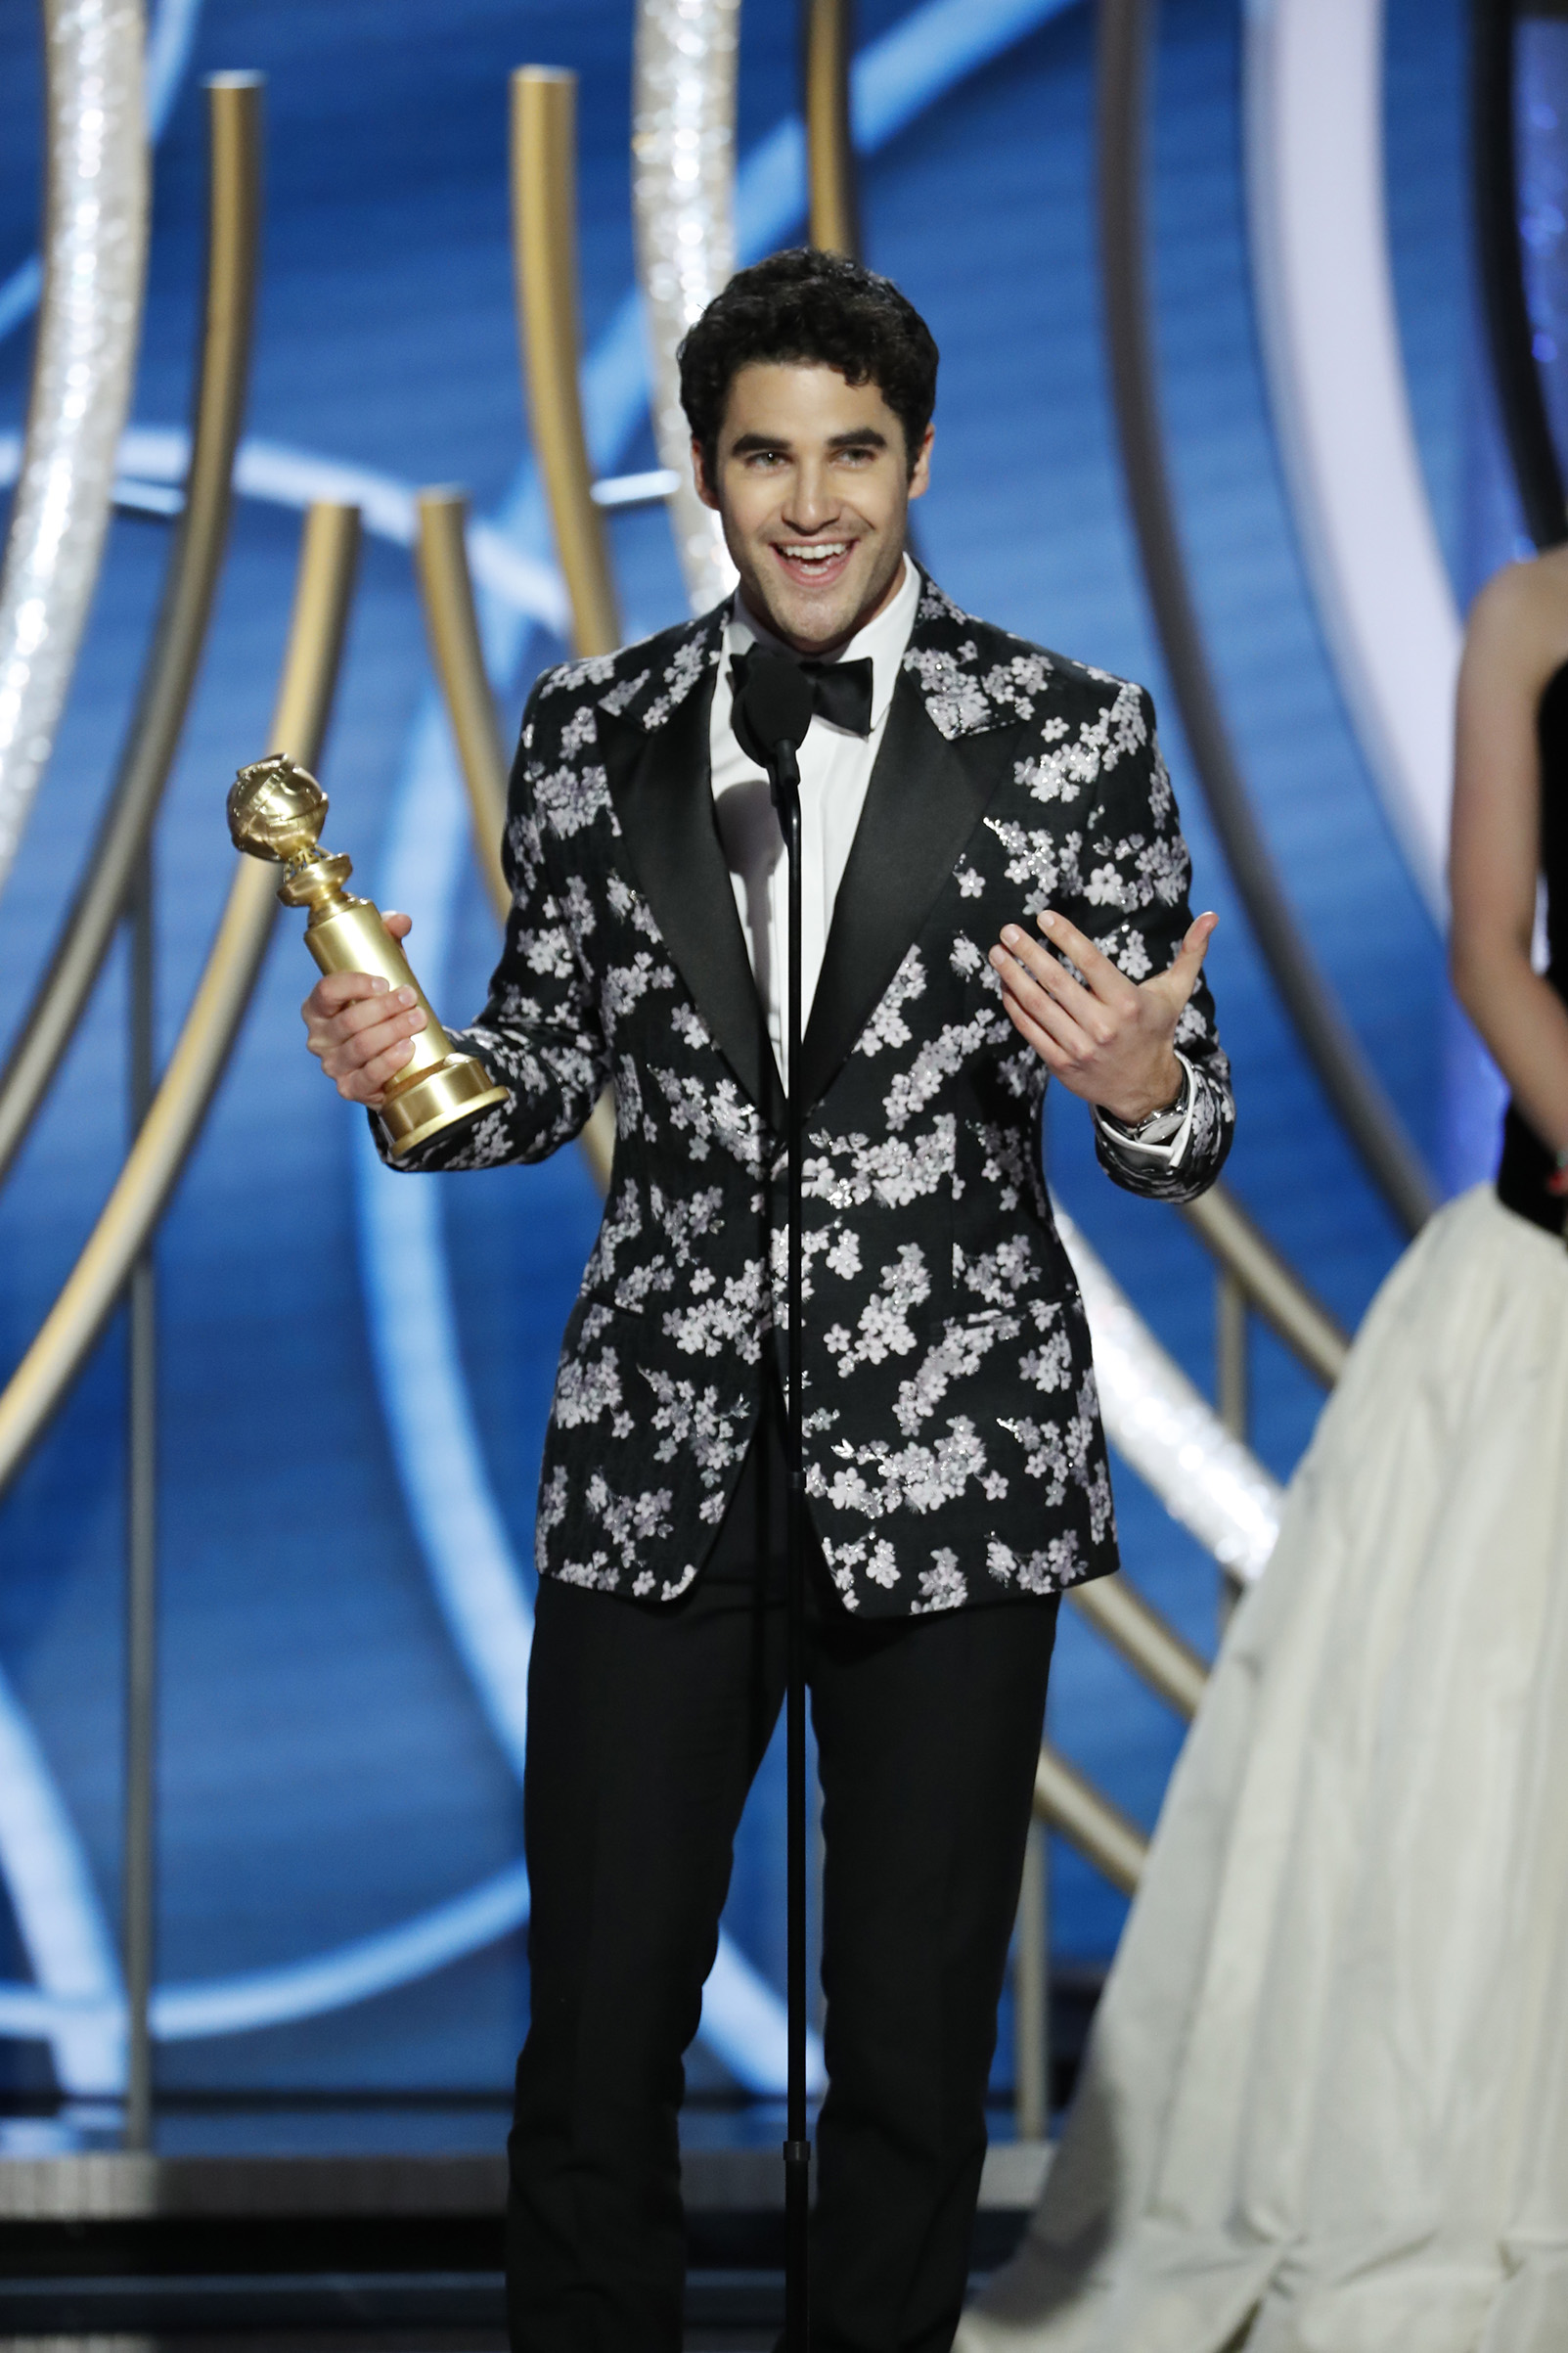 Darren Criss from “The Assassination of Gianni Versace: American Crime Story” accepts the Best Performance by an Actor in a Limited Series or Motion Picture Made for Television award onstage during the 76th Annual Golden Globe Awards.